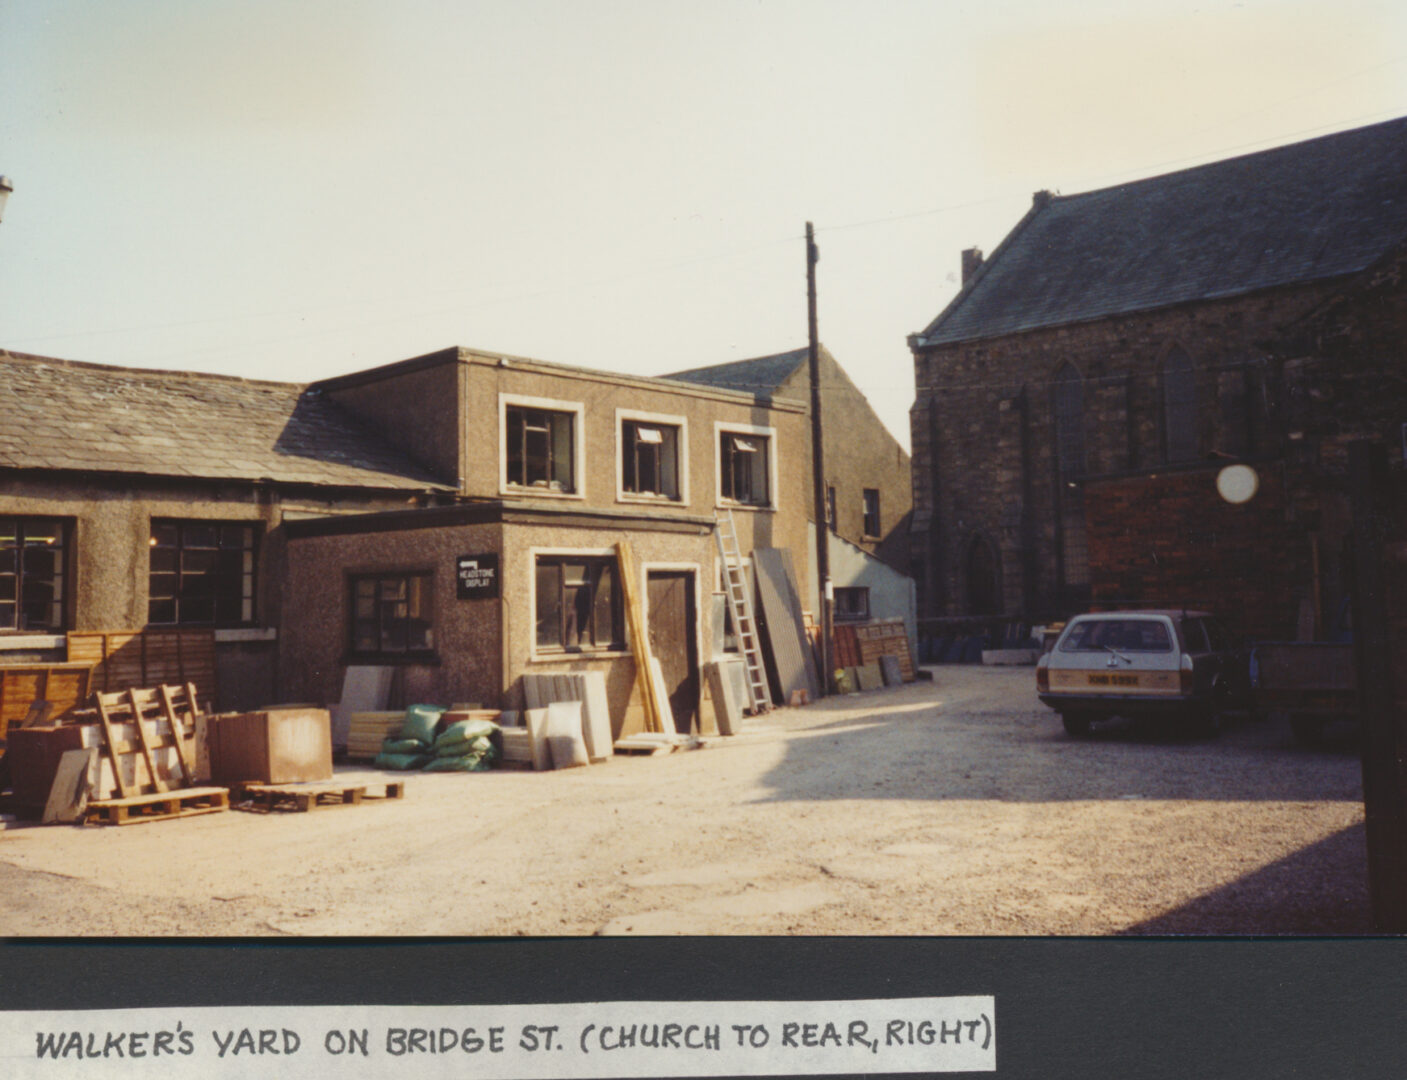 Bridge Street Walkers Yard with former chapel church to rear on right 1989 photo